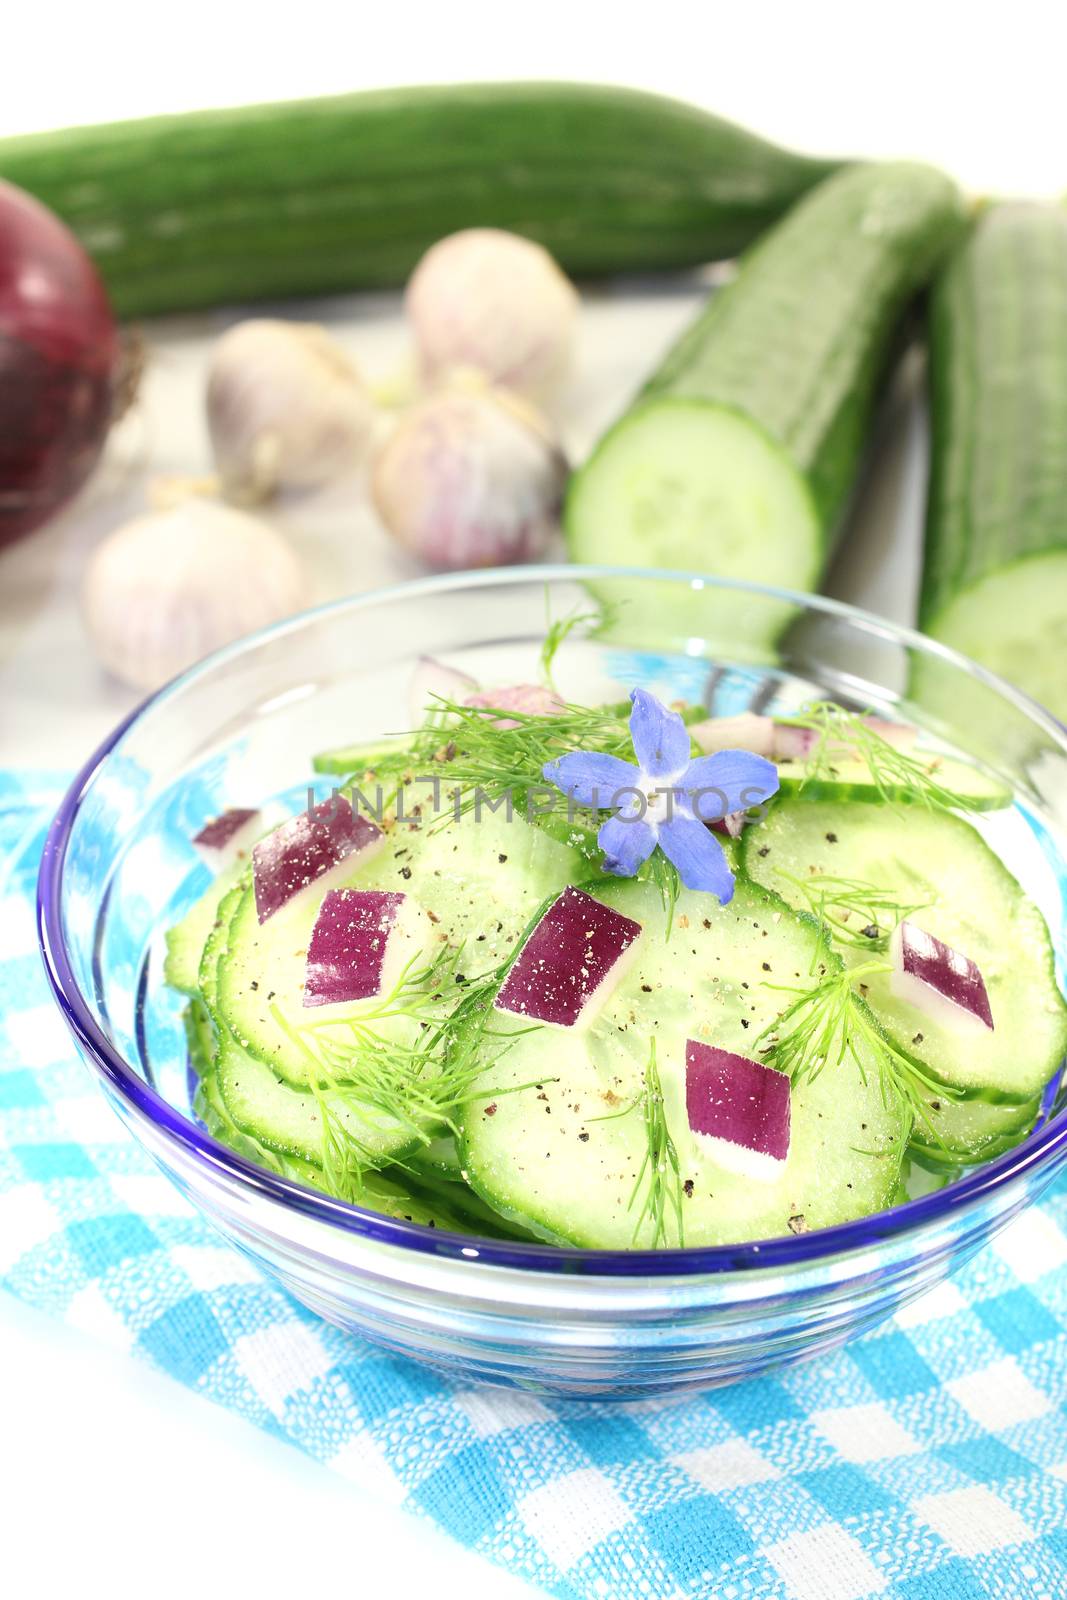 Cucumber salad with onions, dill and borage flower on a light background